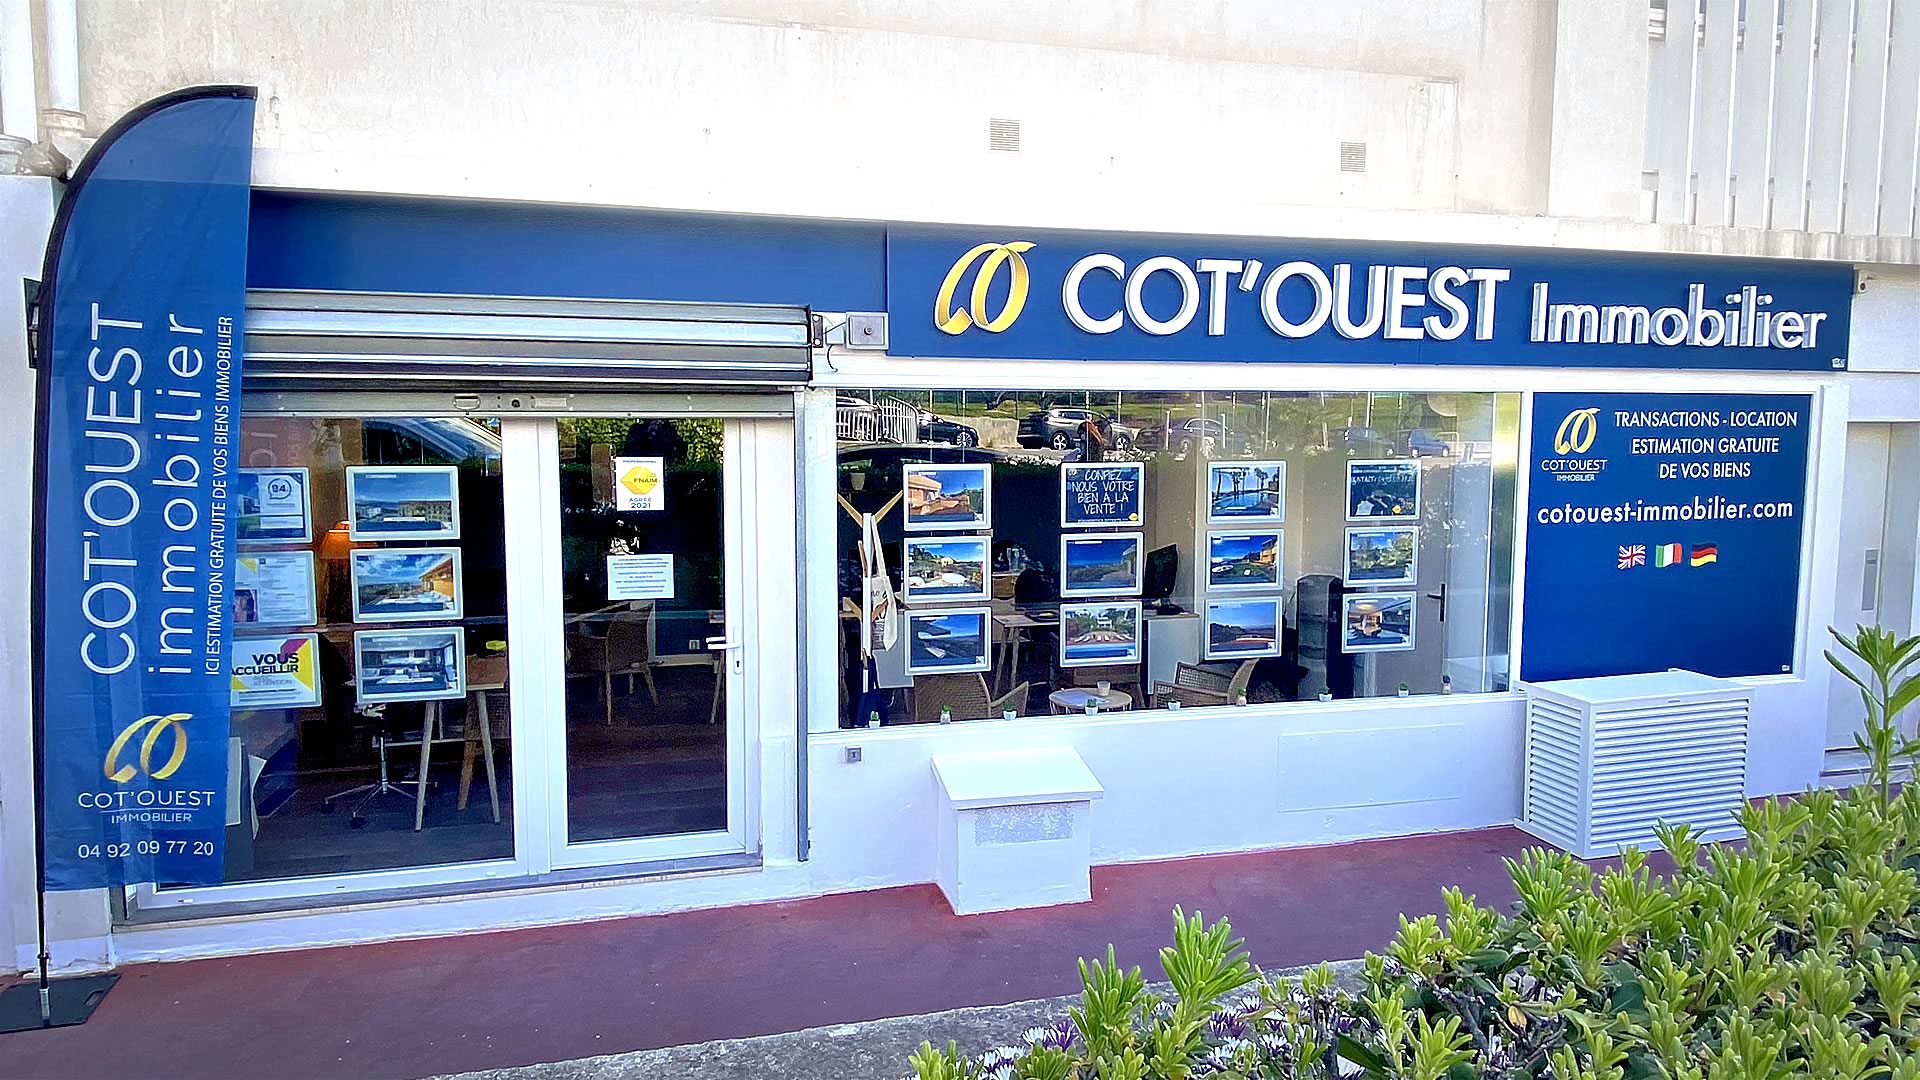 Cot'ouest Immobilier